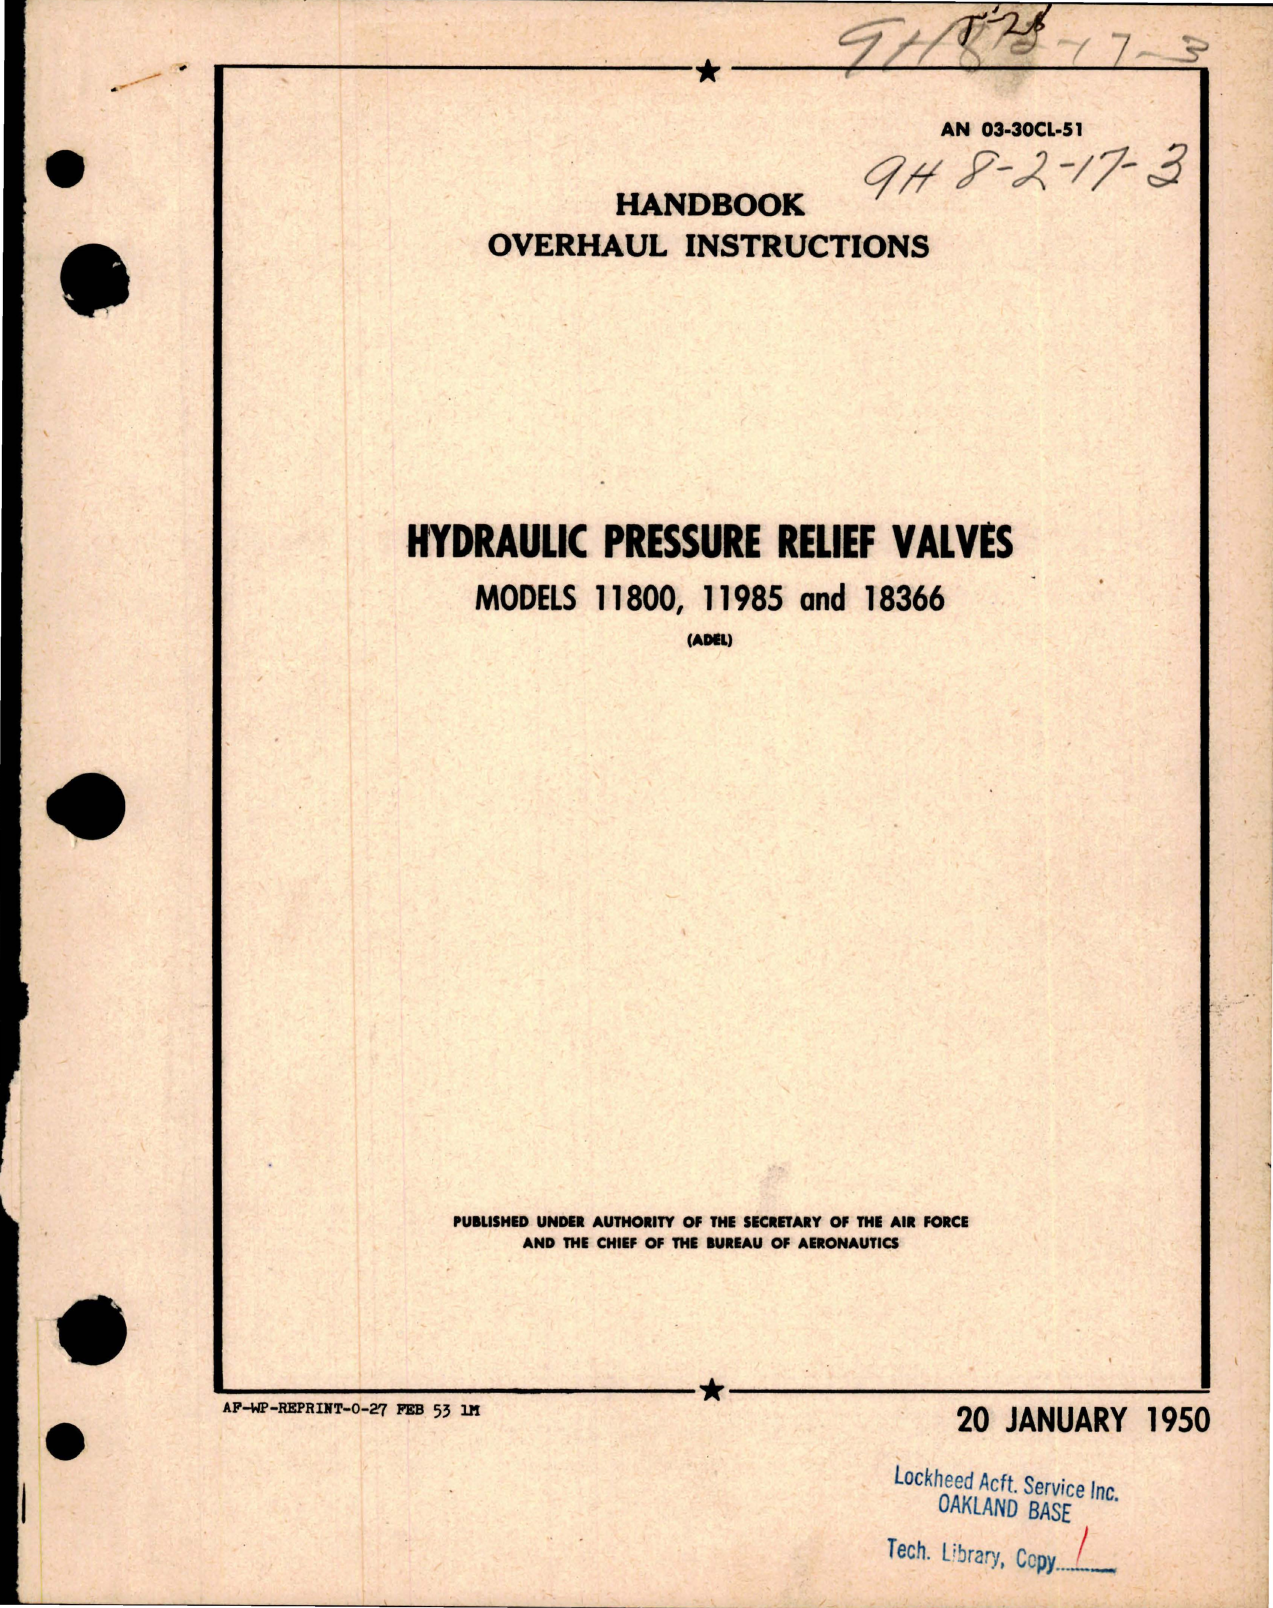 Sample page 1 from AirCorps Library document: Overhaul Instructions for Hydraulic Pressure Relief Valves - Models 11800, 11985 and 18366